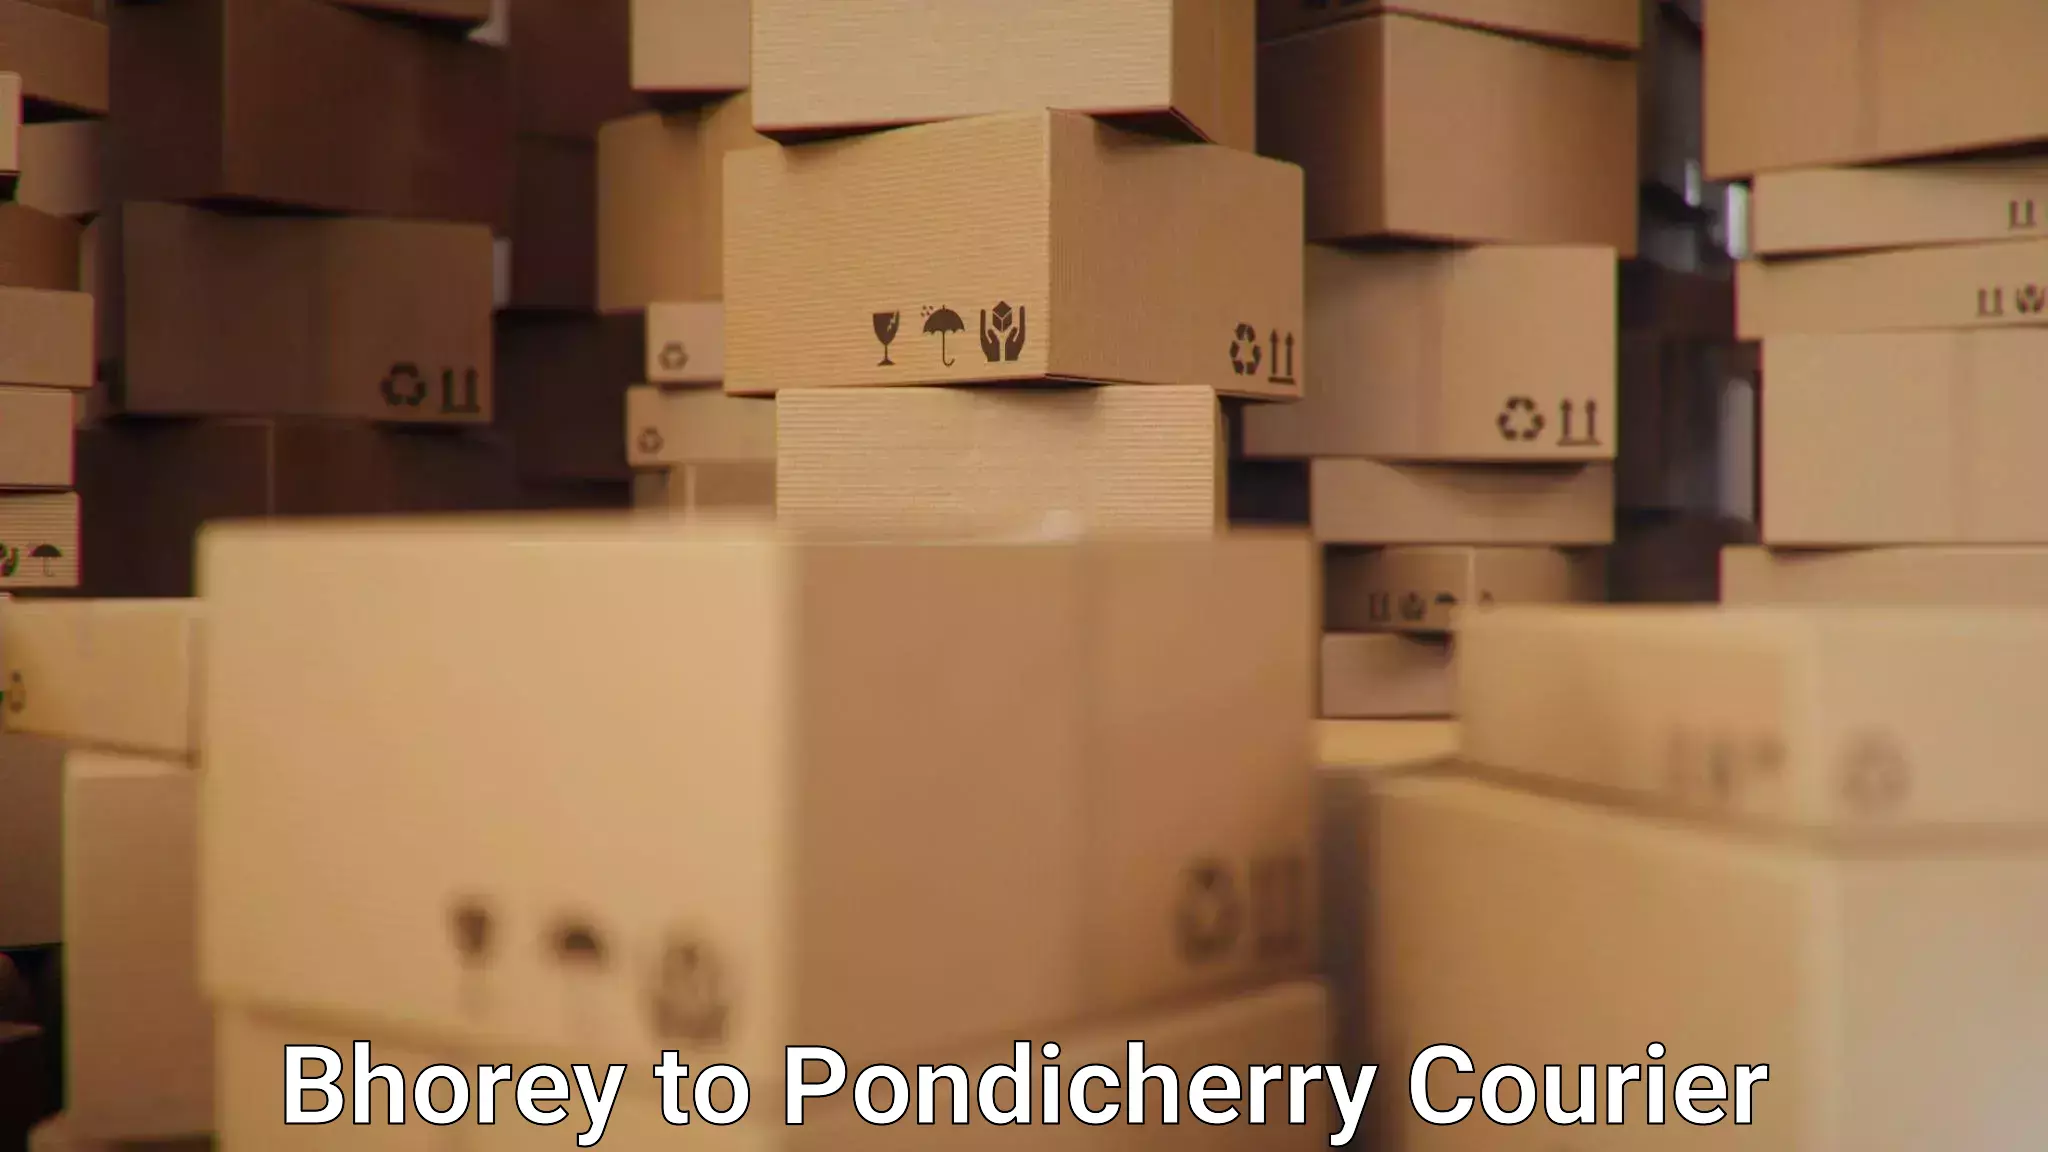 Automated shipping processes Bhorey to Pondicherry